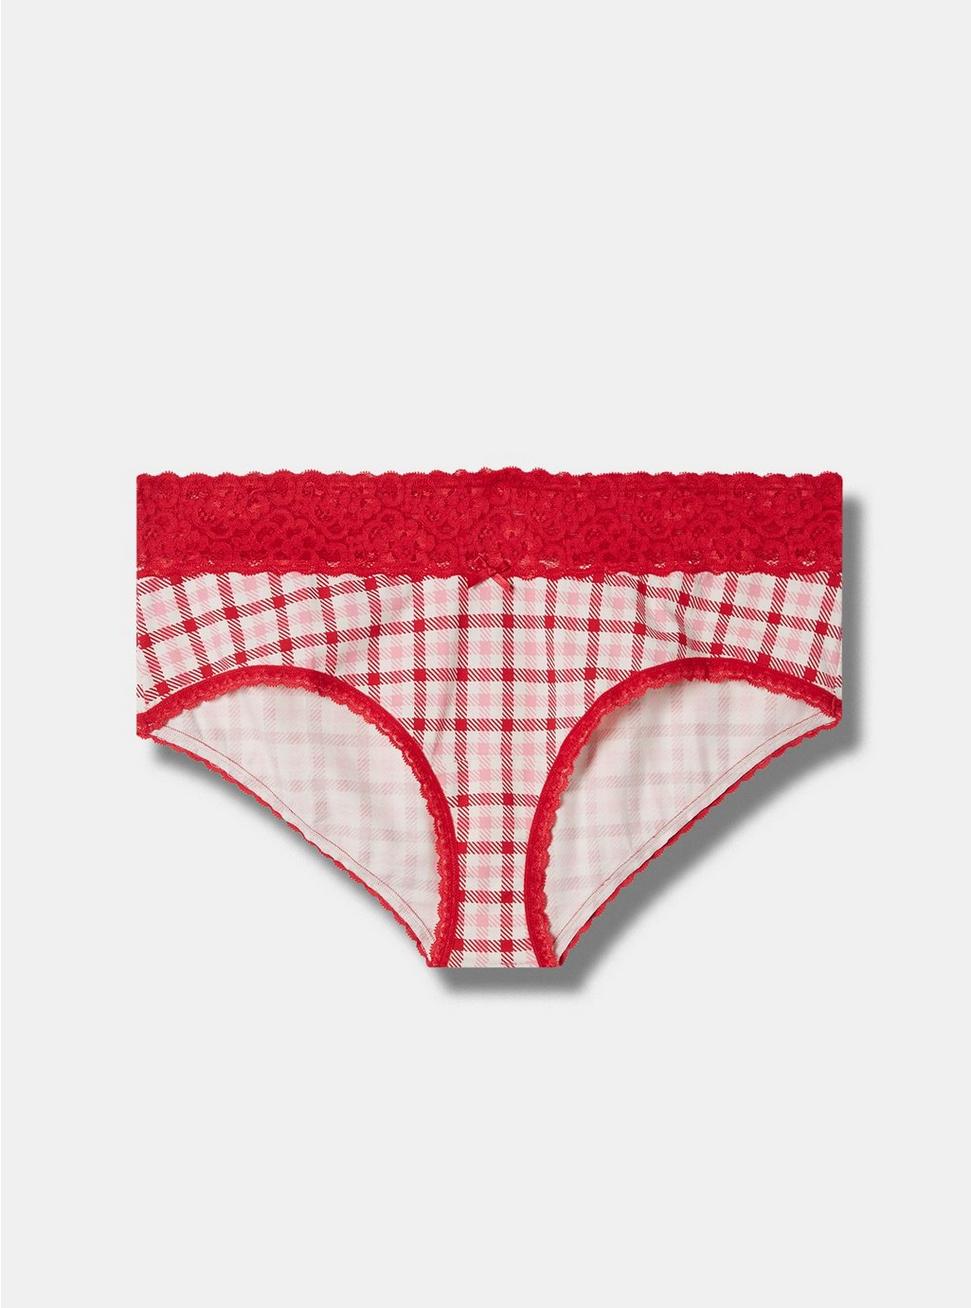 Cotton Mid-Rise Cheeky Lace Trim Panty, RASPBERRY GINGHAM, hi-res